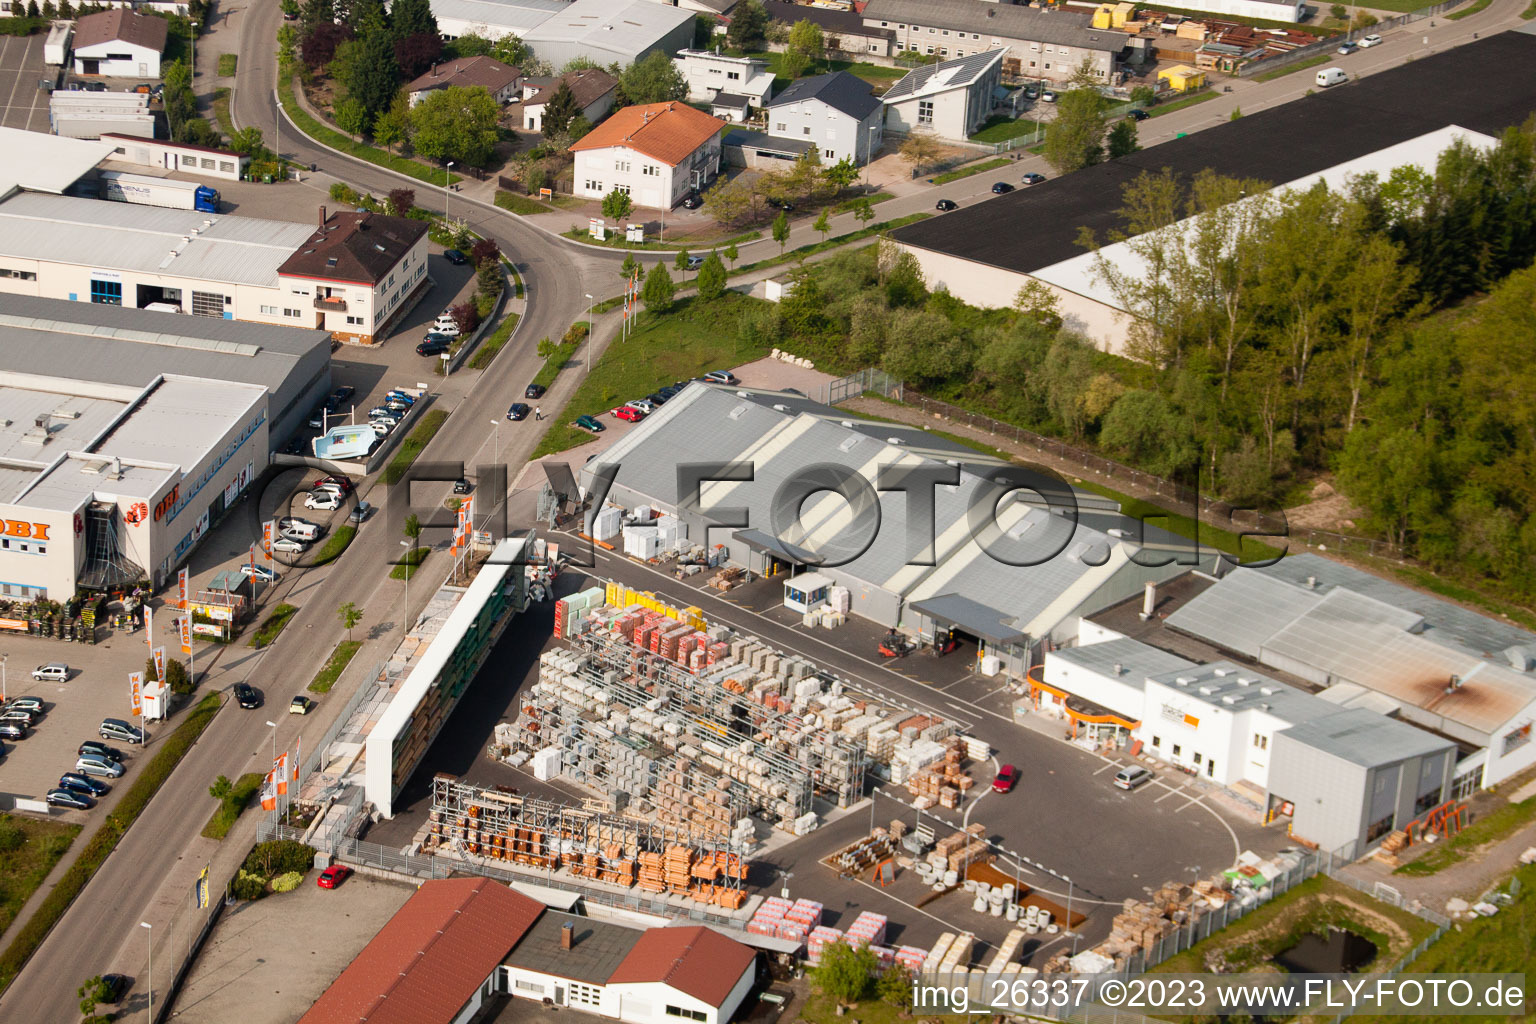 Aerial photograpy of Minderlachen, UNION building materials trade in the district Minderslachen in Kandel in the state Rhineland-Palatinate, Germany